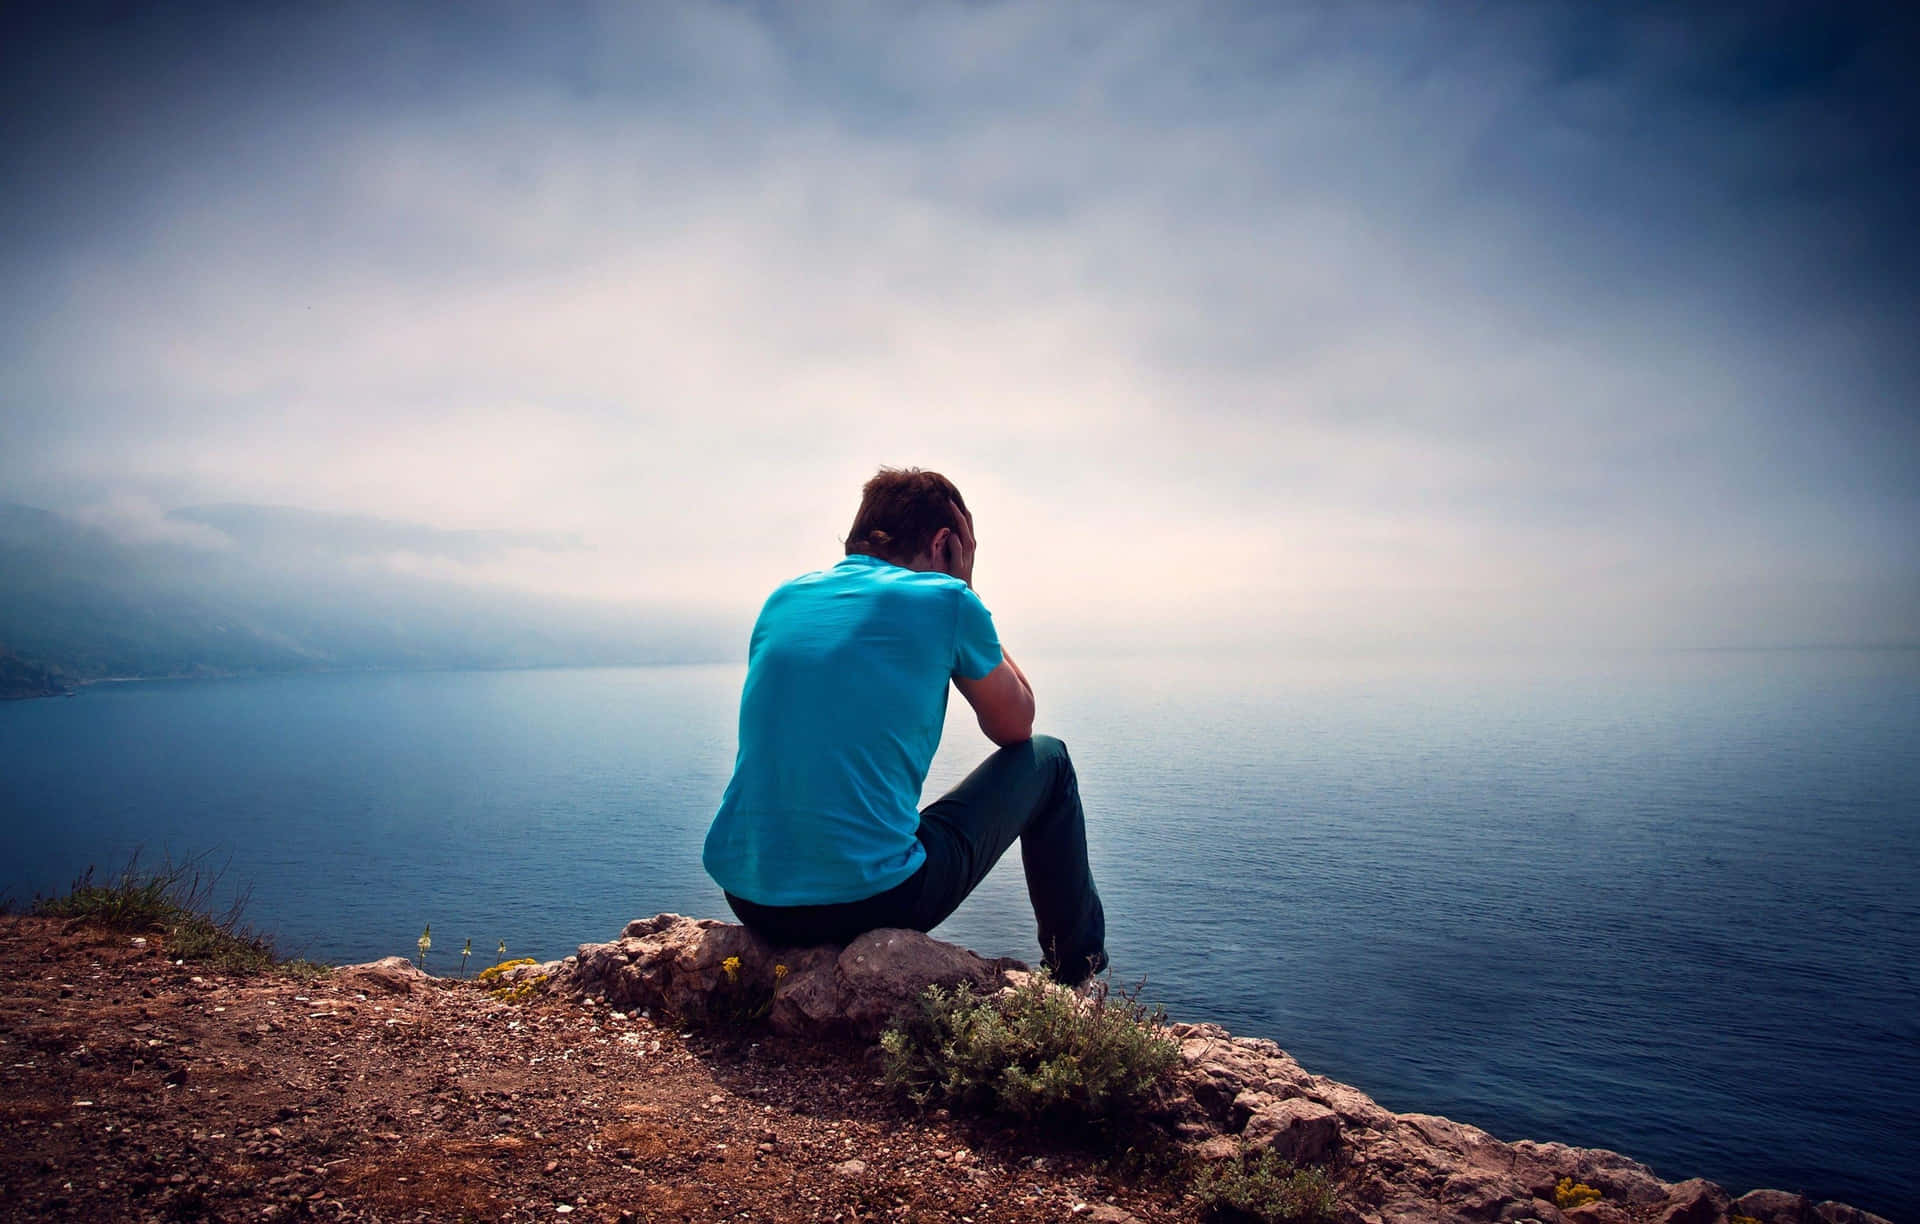 Alone Boy With Ocean View Picture